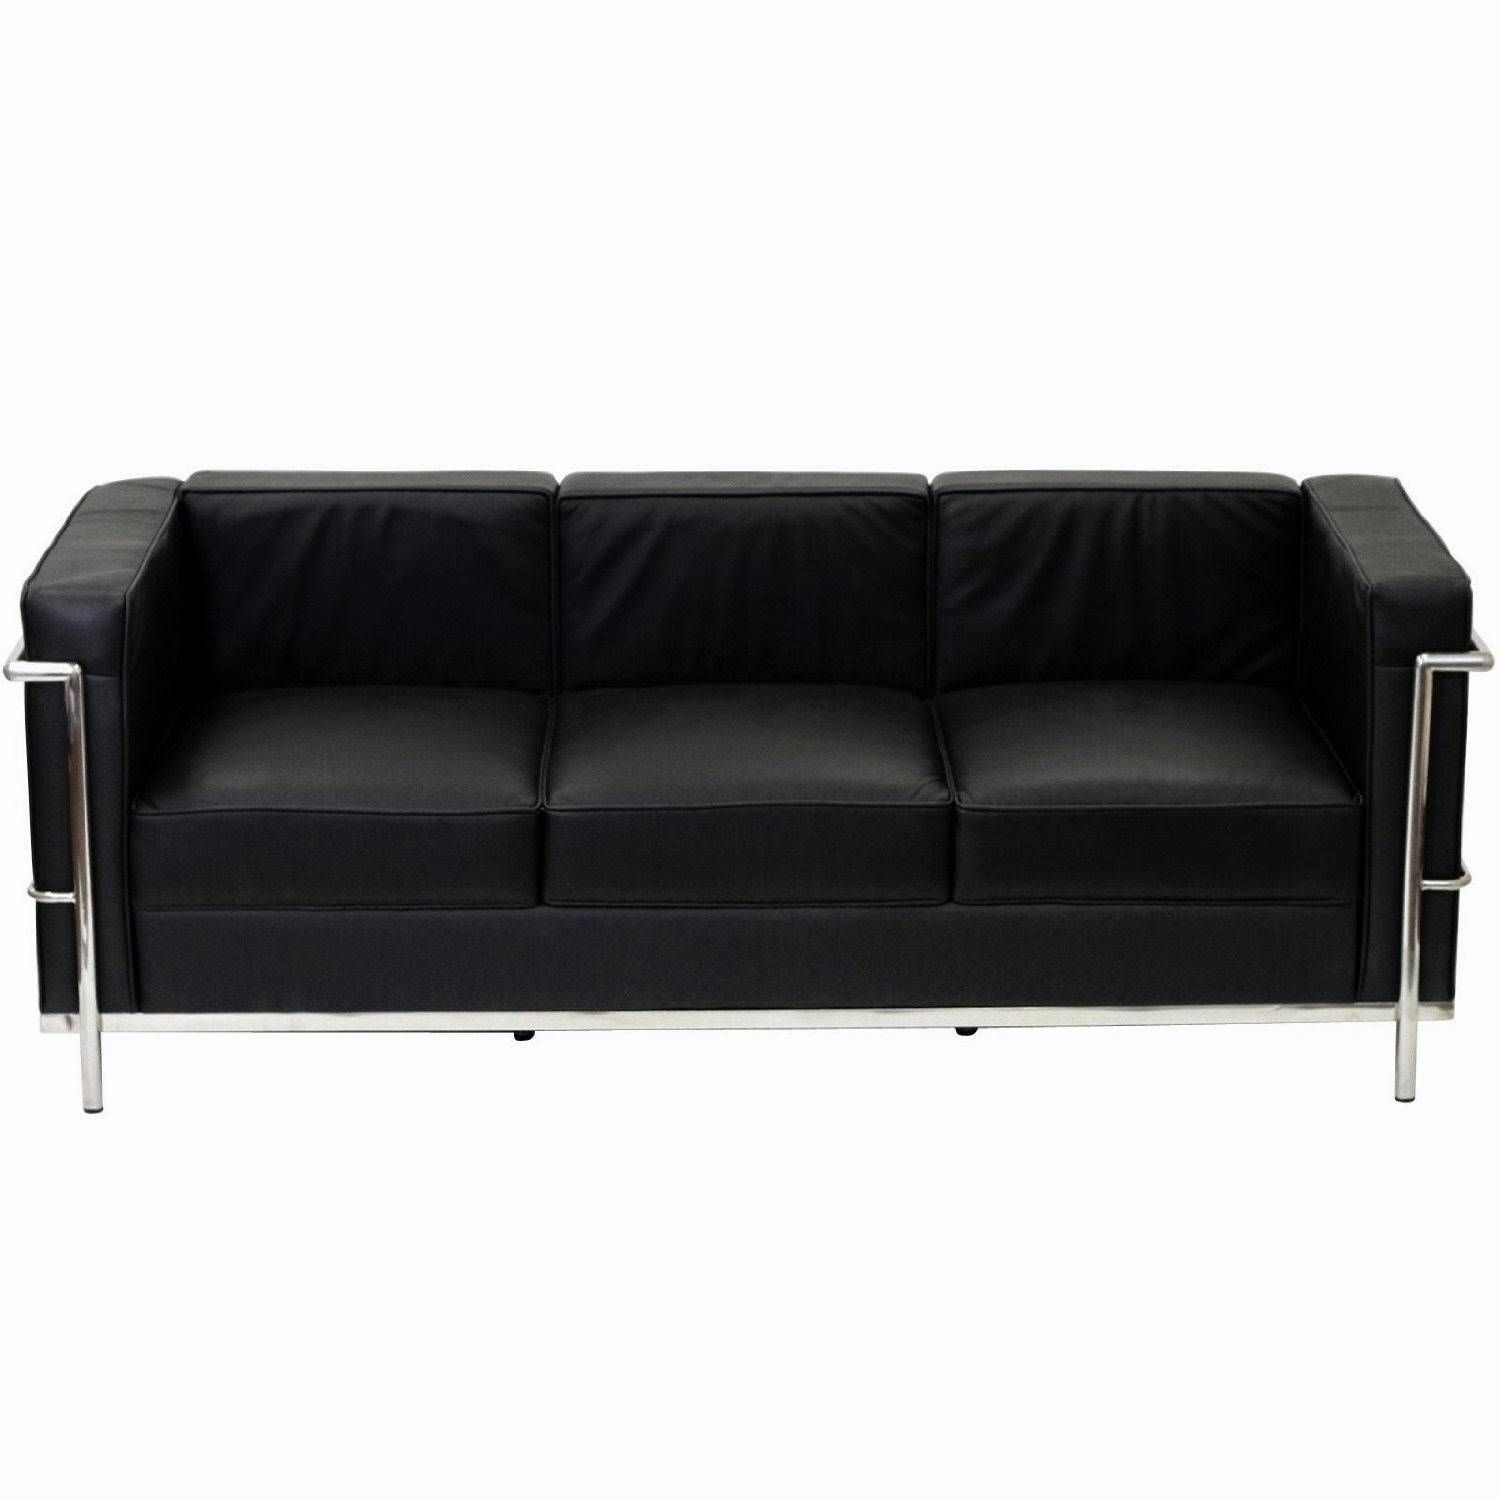 Black Leather Sofa Regarding Black Modern Couches (View 7 of 15)